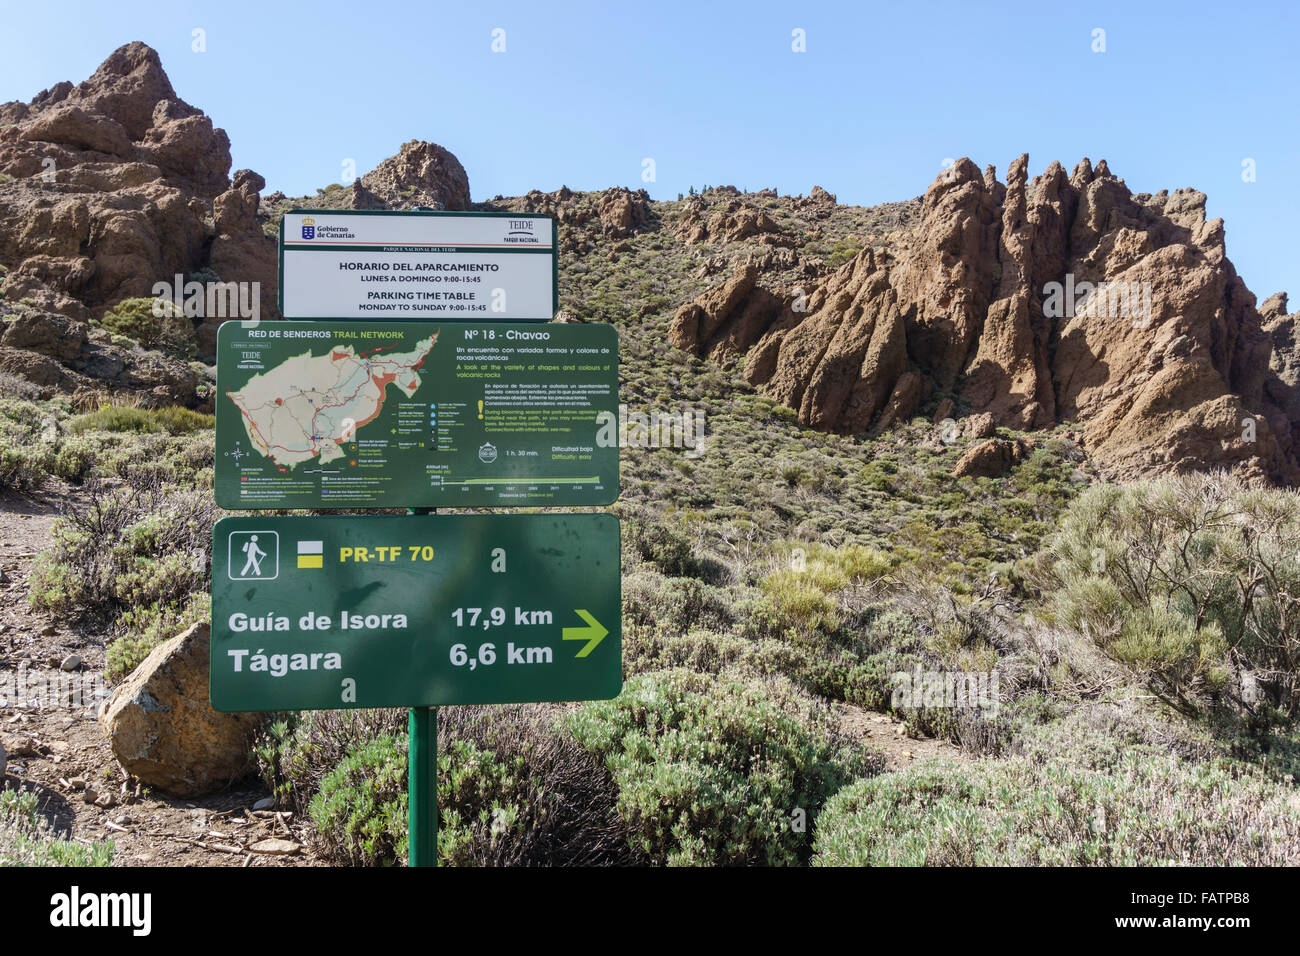 Tenerife, Canary Islands - Mount Teide national park. At Juan Evora visitor centre. Interpretation sign and walking route guide. Stock Photo